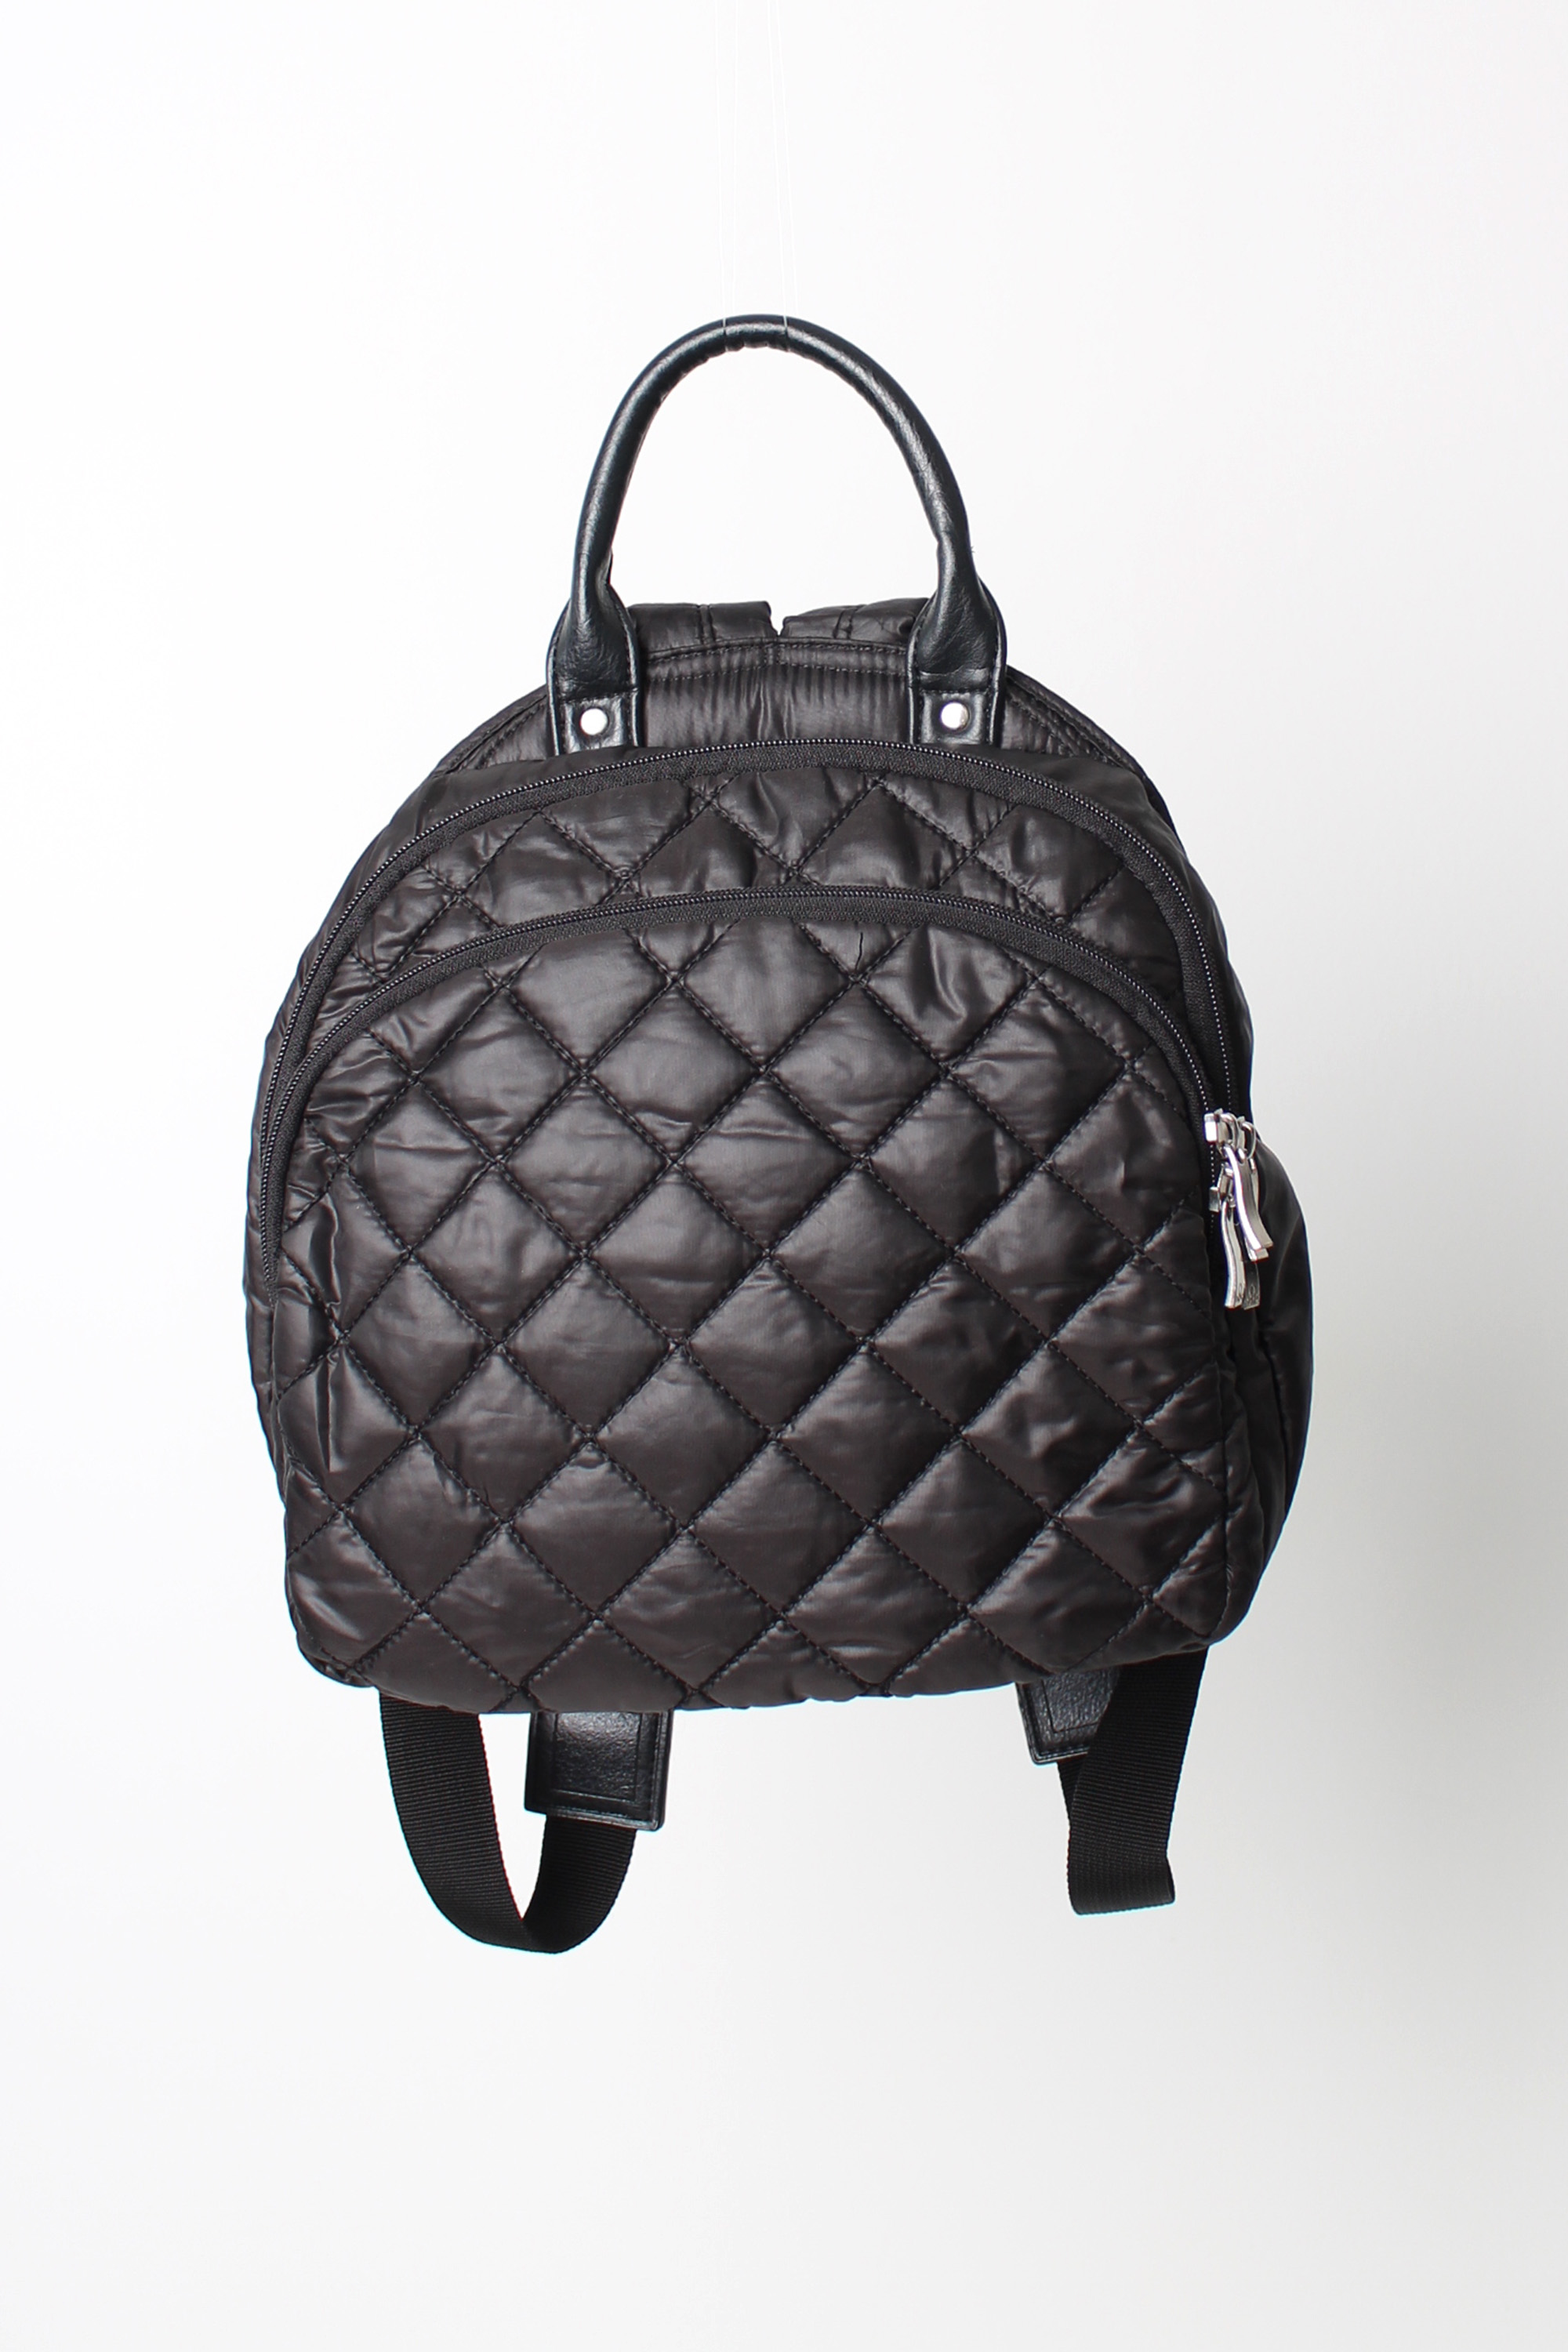 benetton quilted bag